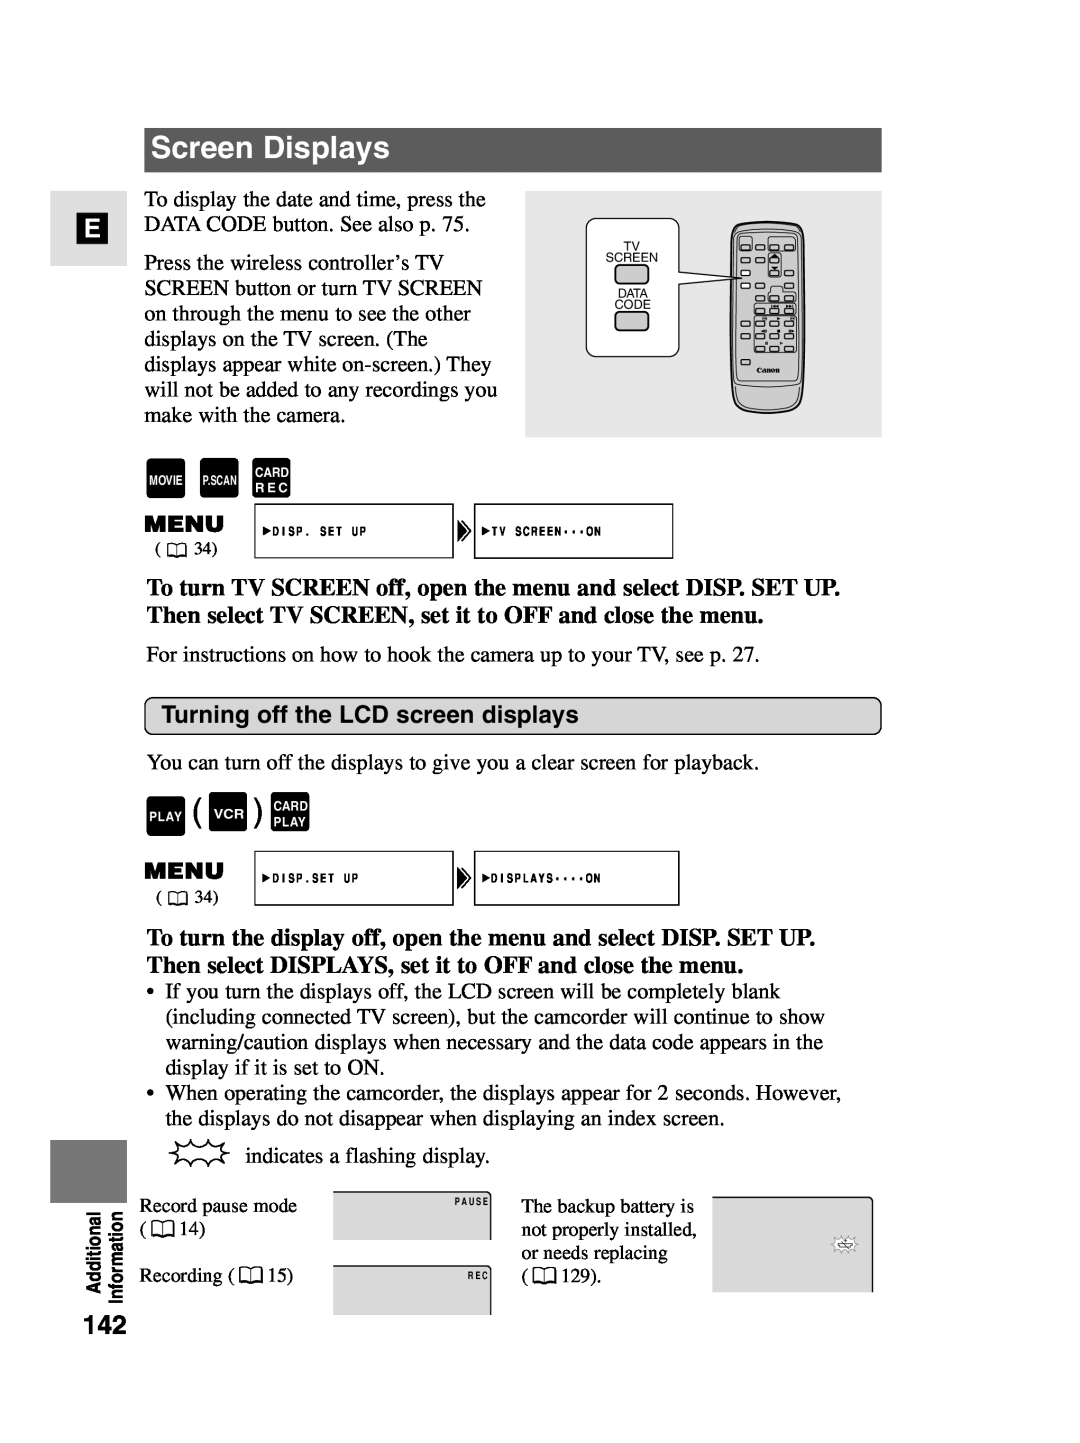 Canon MV4i MC instruction manual Screen Displays, Turning off the LCD screen displays 